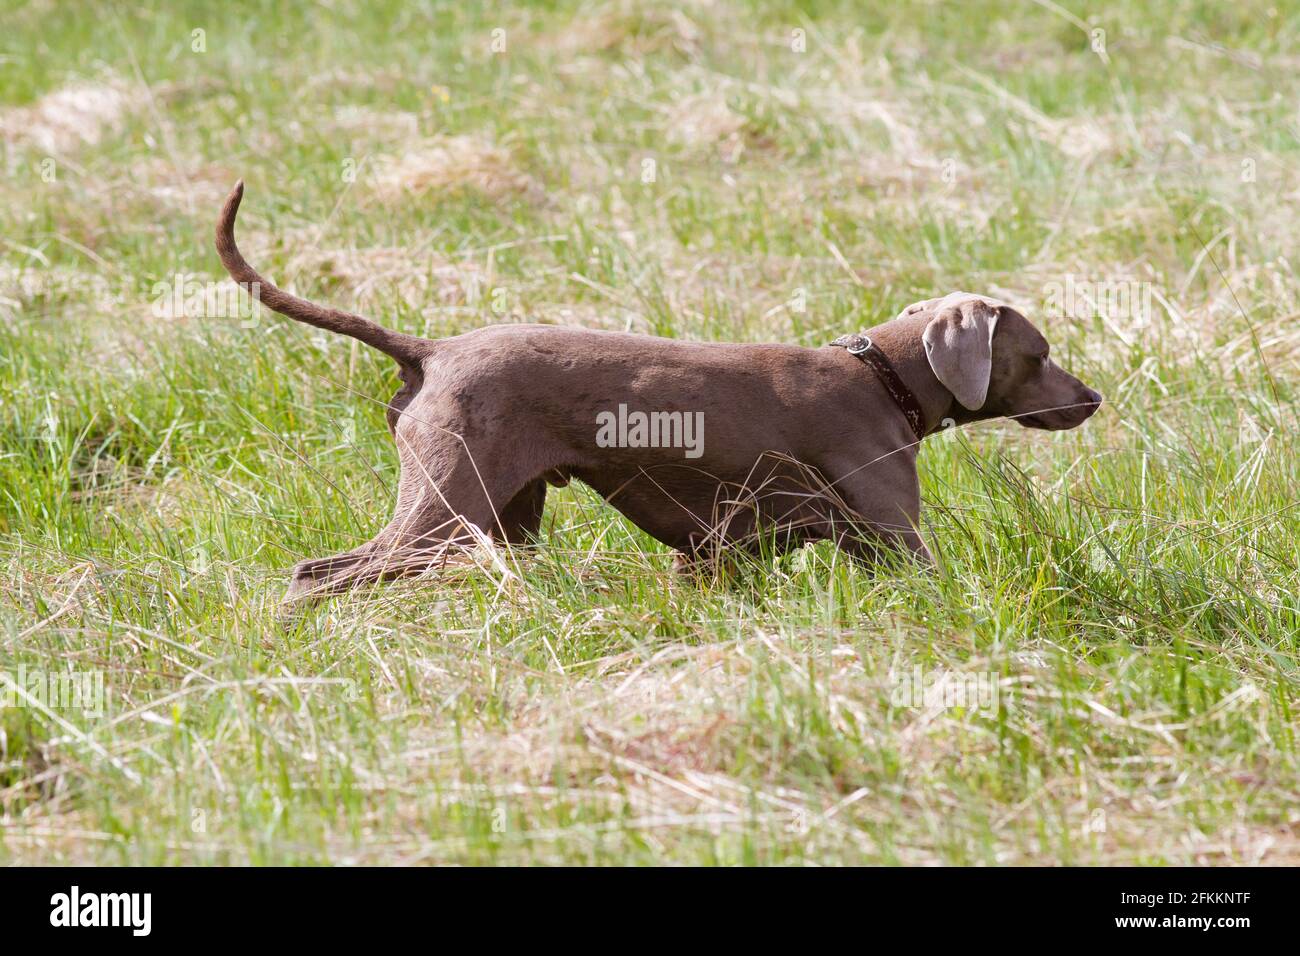 hungarian vyzhla running through the meadow in search of game while hunting Stock Photo